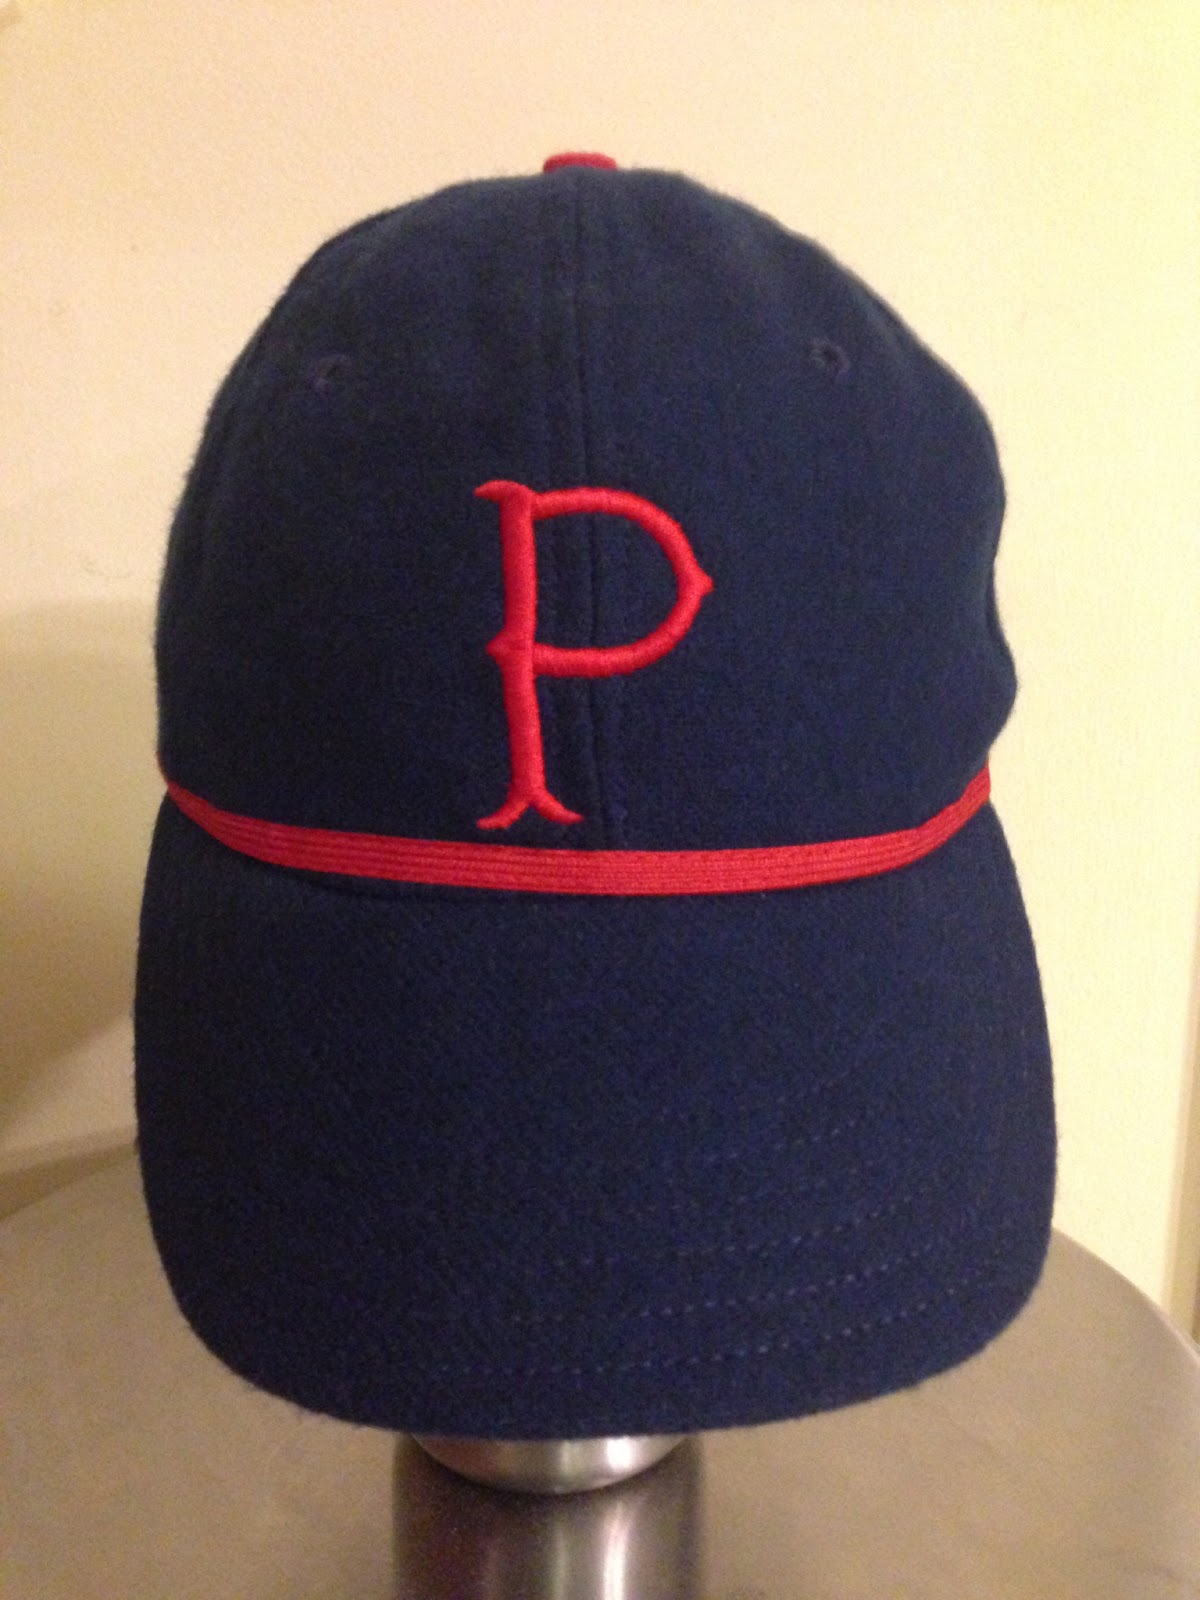 Cooperstown Ball Cap Co. Caps: 1940 Pittsburg Pirates (H)